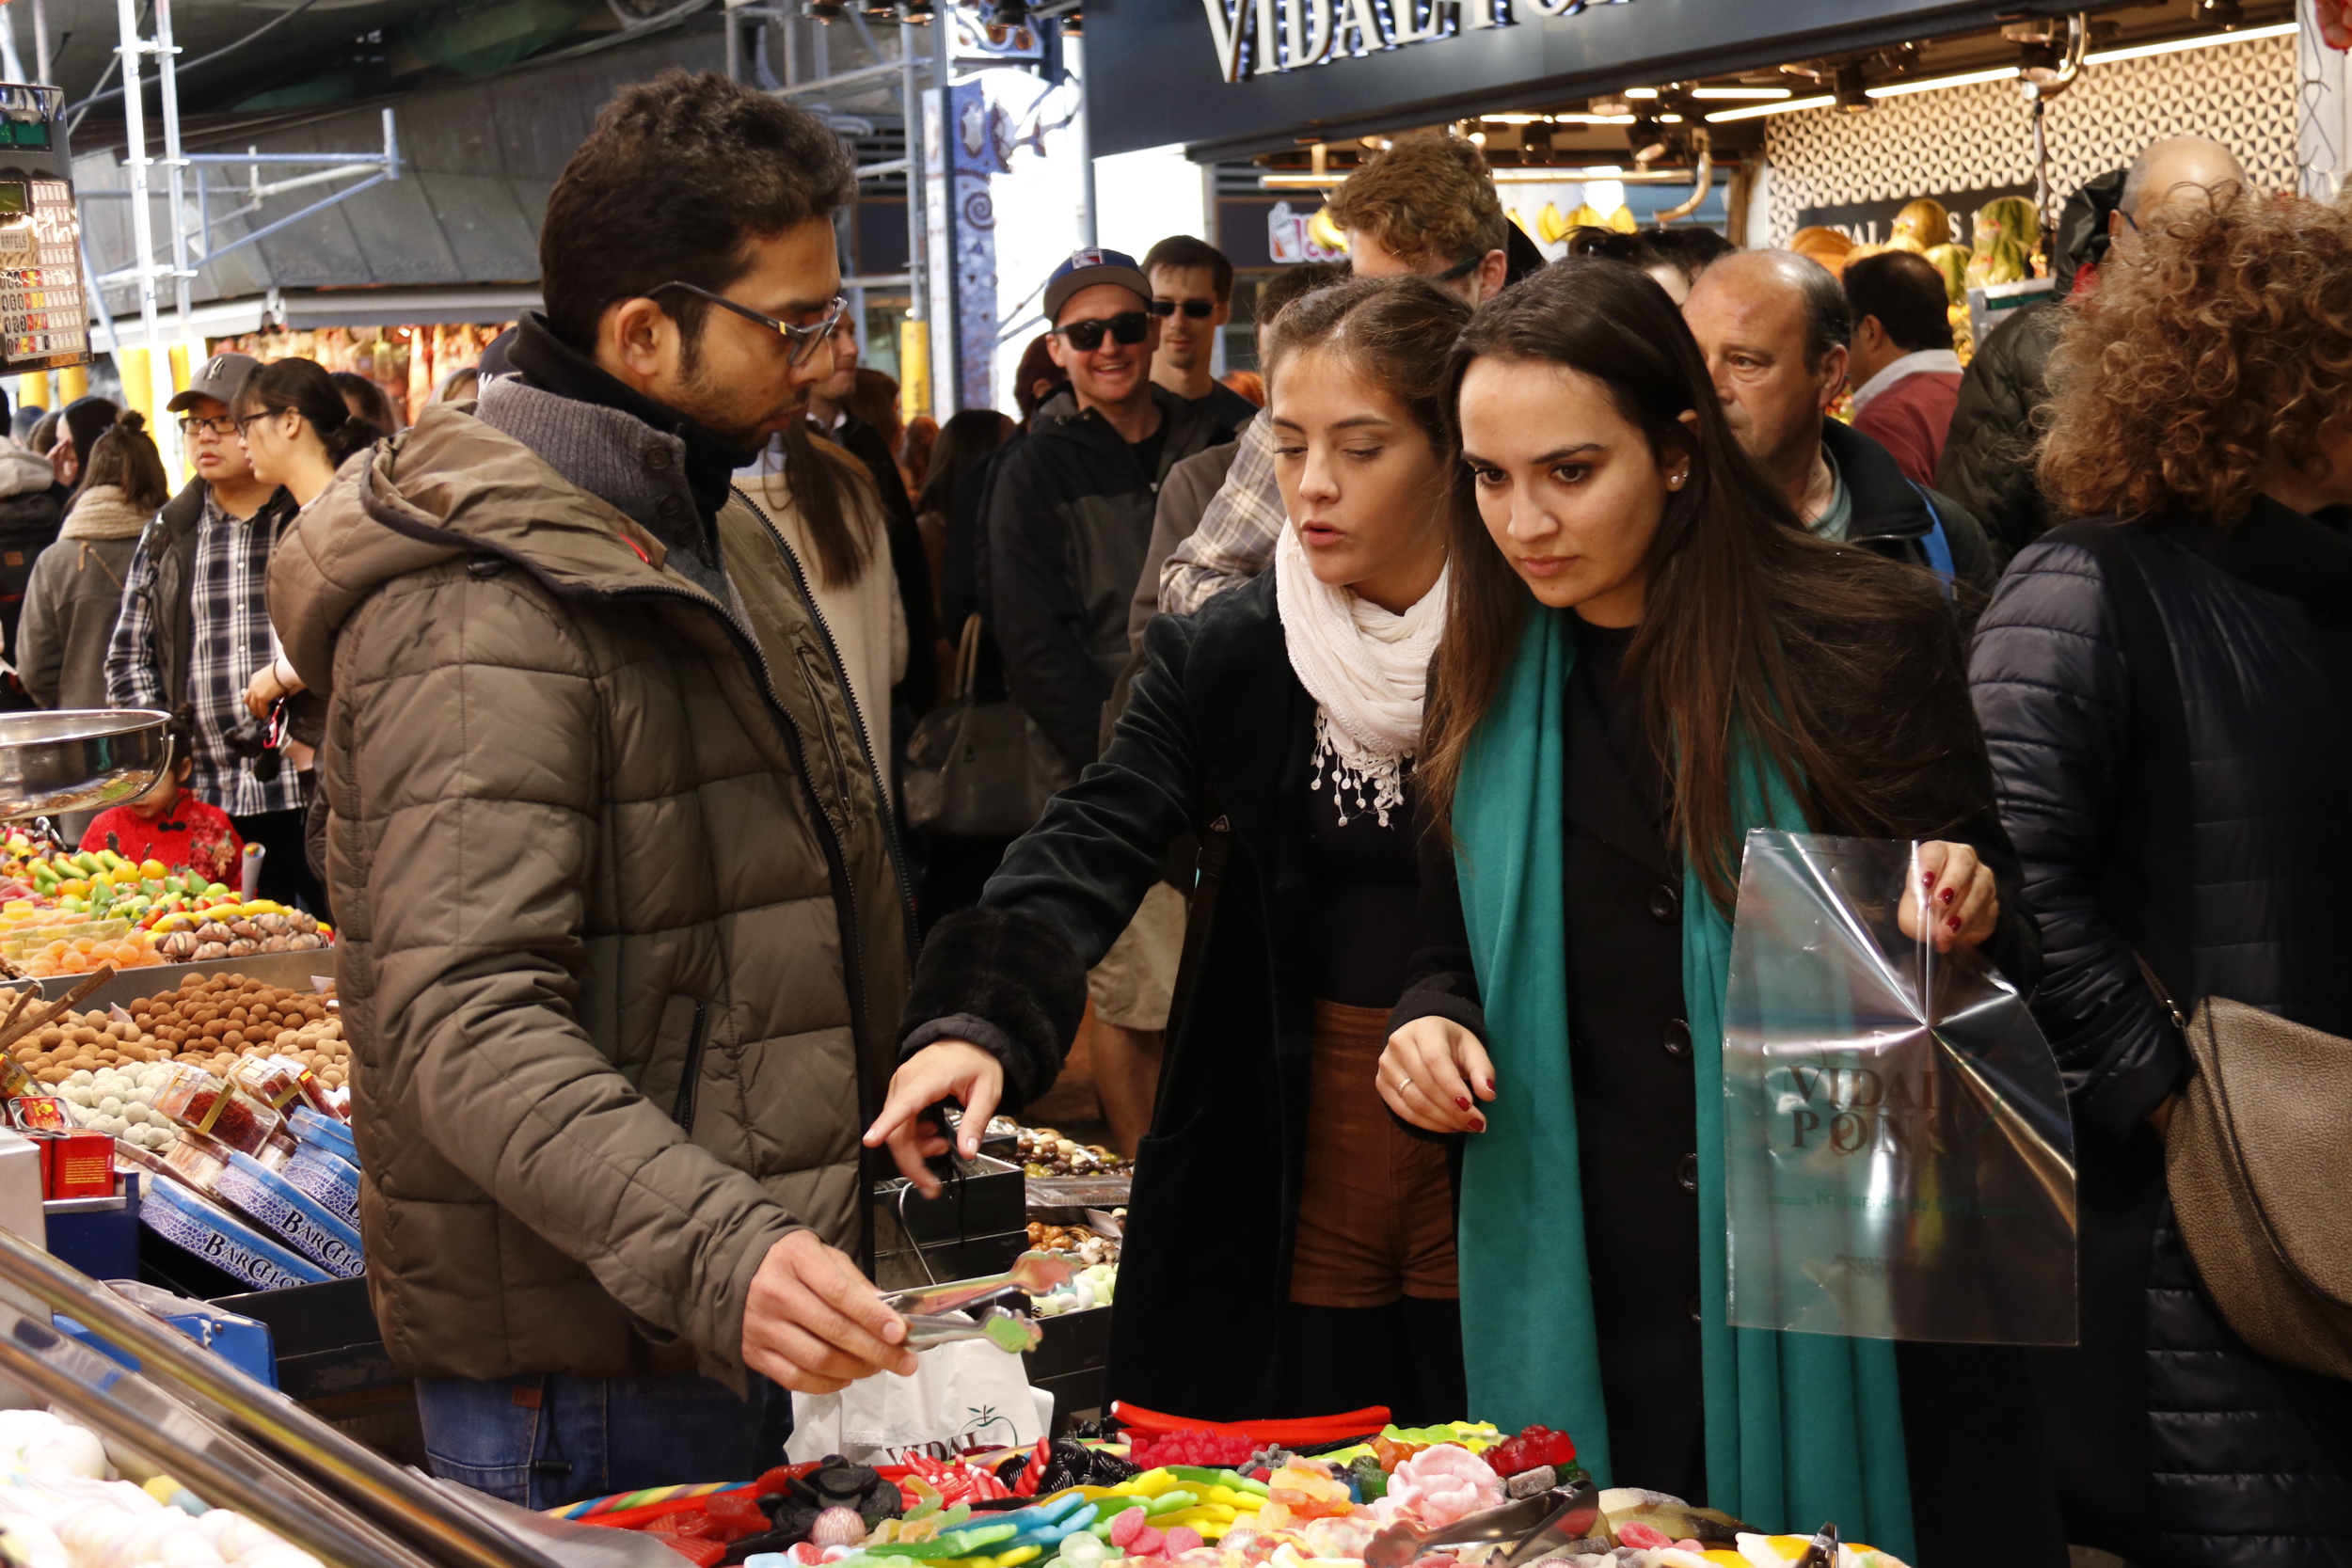 Tourists buying sweets at the Boqueria market in central Barcelona (by ACN)